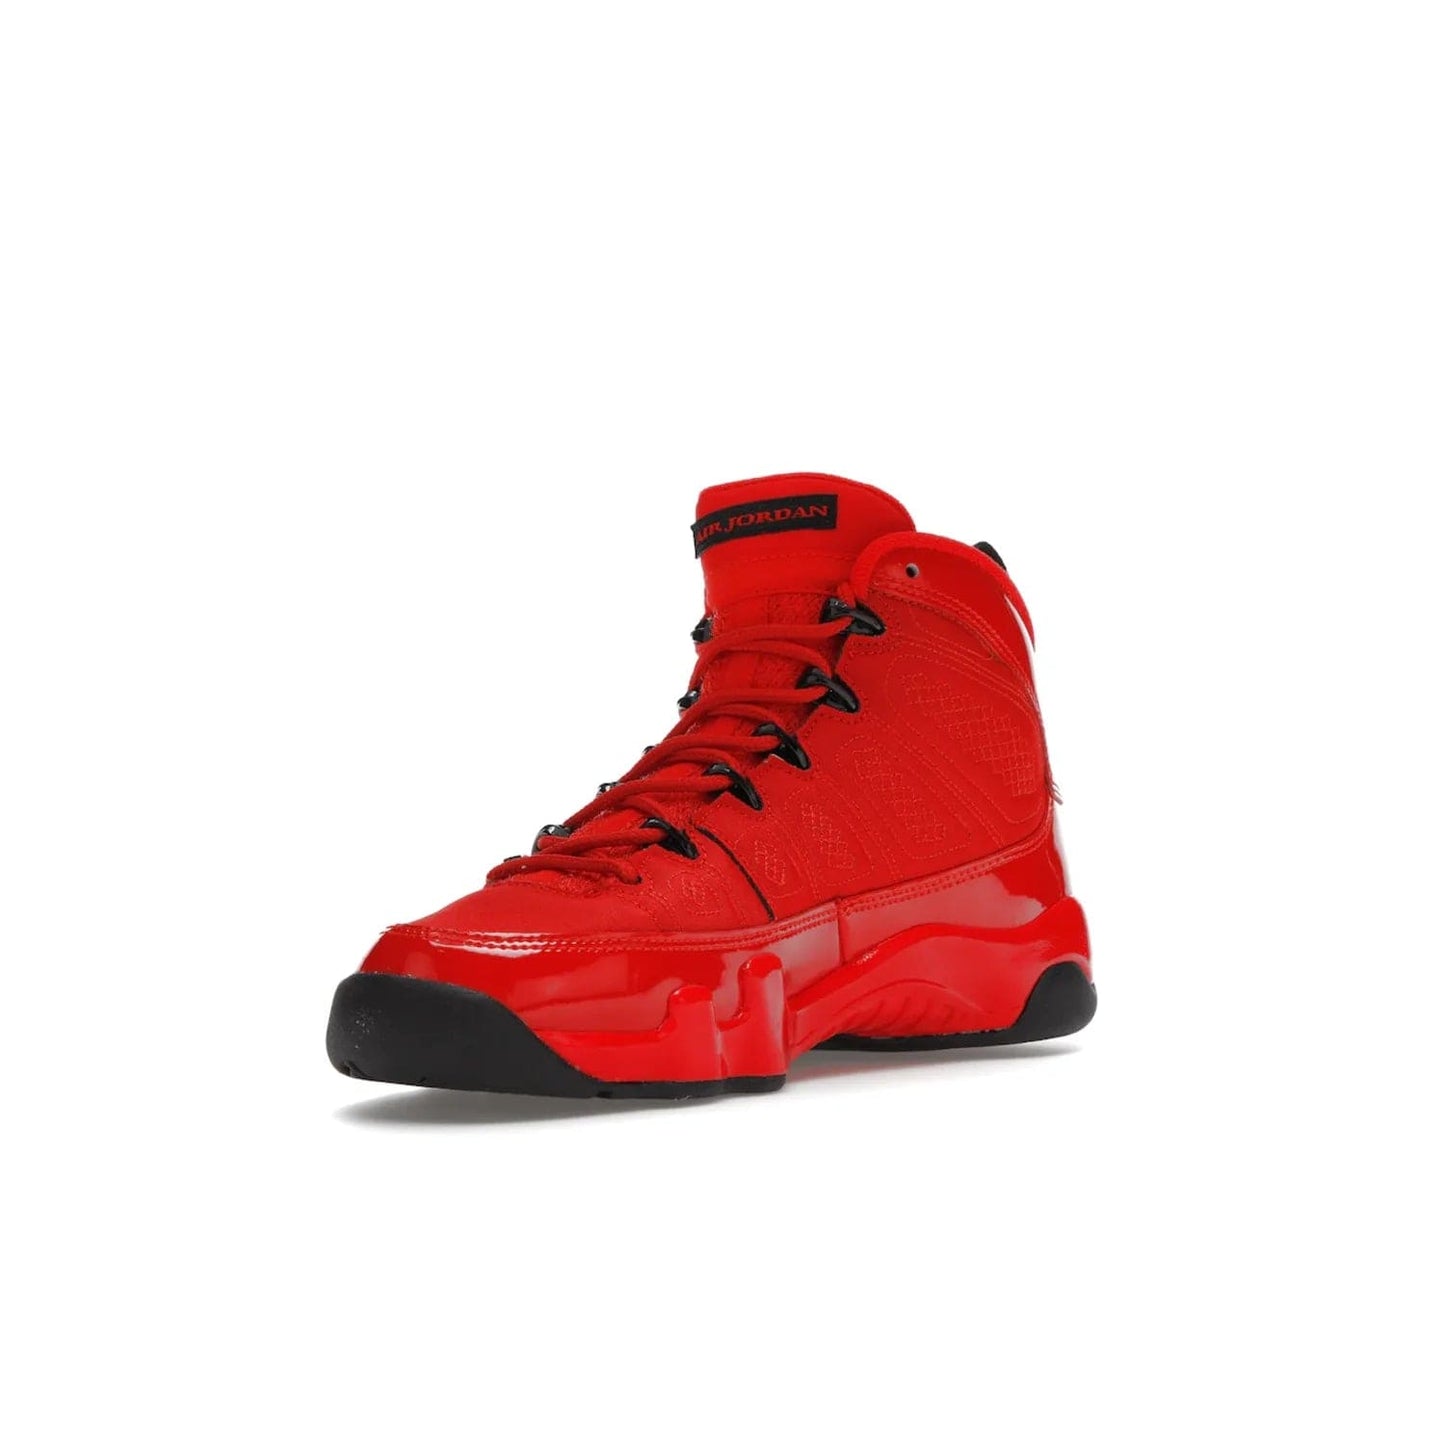 Jordan 9 Retro Chile Red (GS) - Image 14 - Only at www.BallersClubKickz.com - Introducing the Air Jordan 9 Retro Chile Red (GS), a vintage 1993 silhouette with fiery colorway. Features quilted side paneling, glossy patent leather, pull tabs, black contrast accents, and foam midsole. Launching May 2022 for $140.